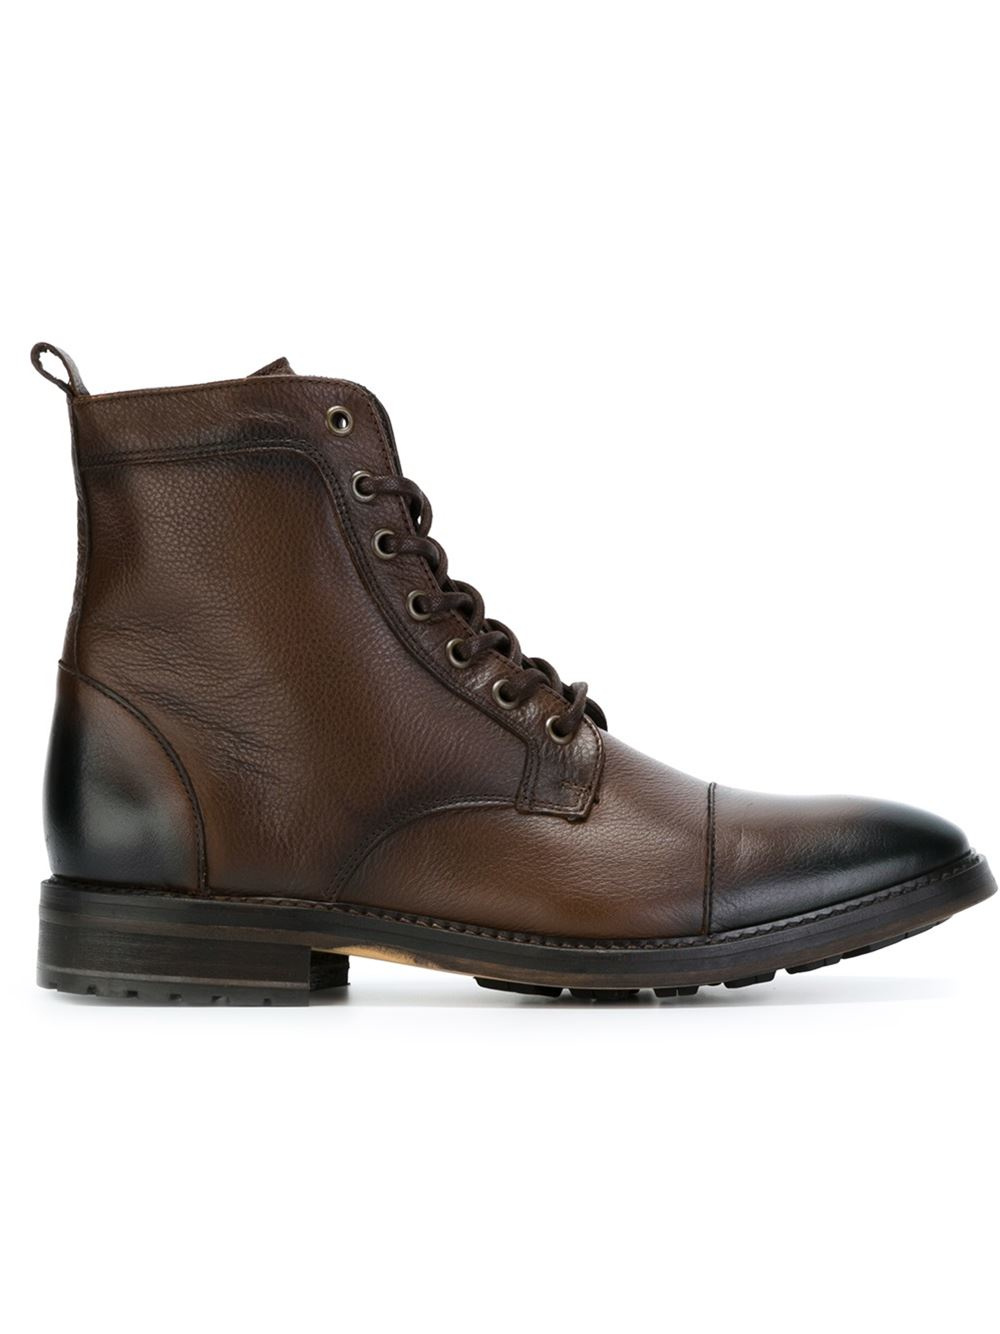 Lyst - Armani jeans Lace-up Boots in Brown for Men